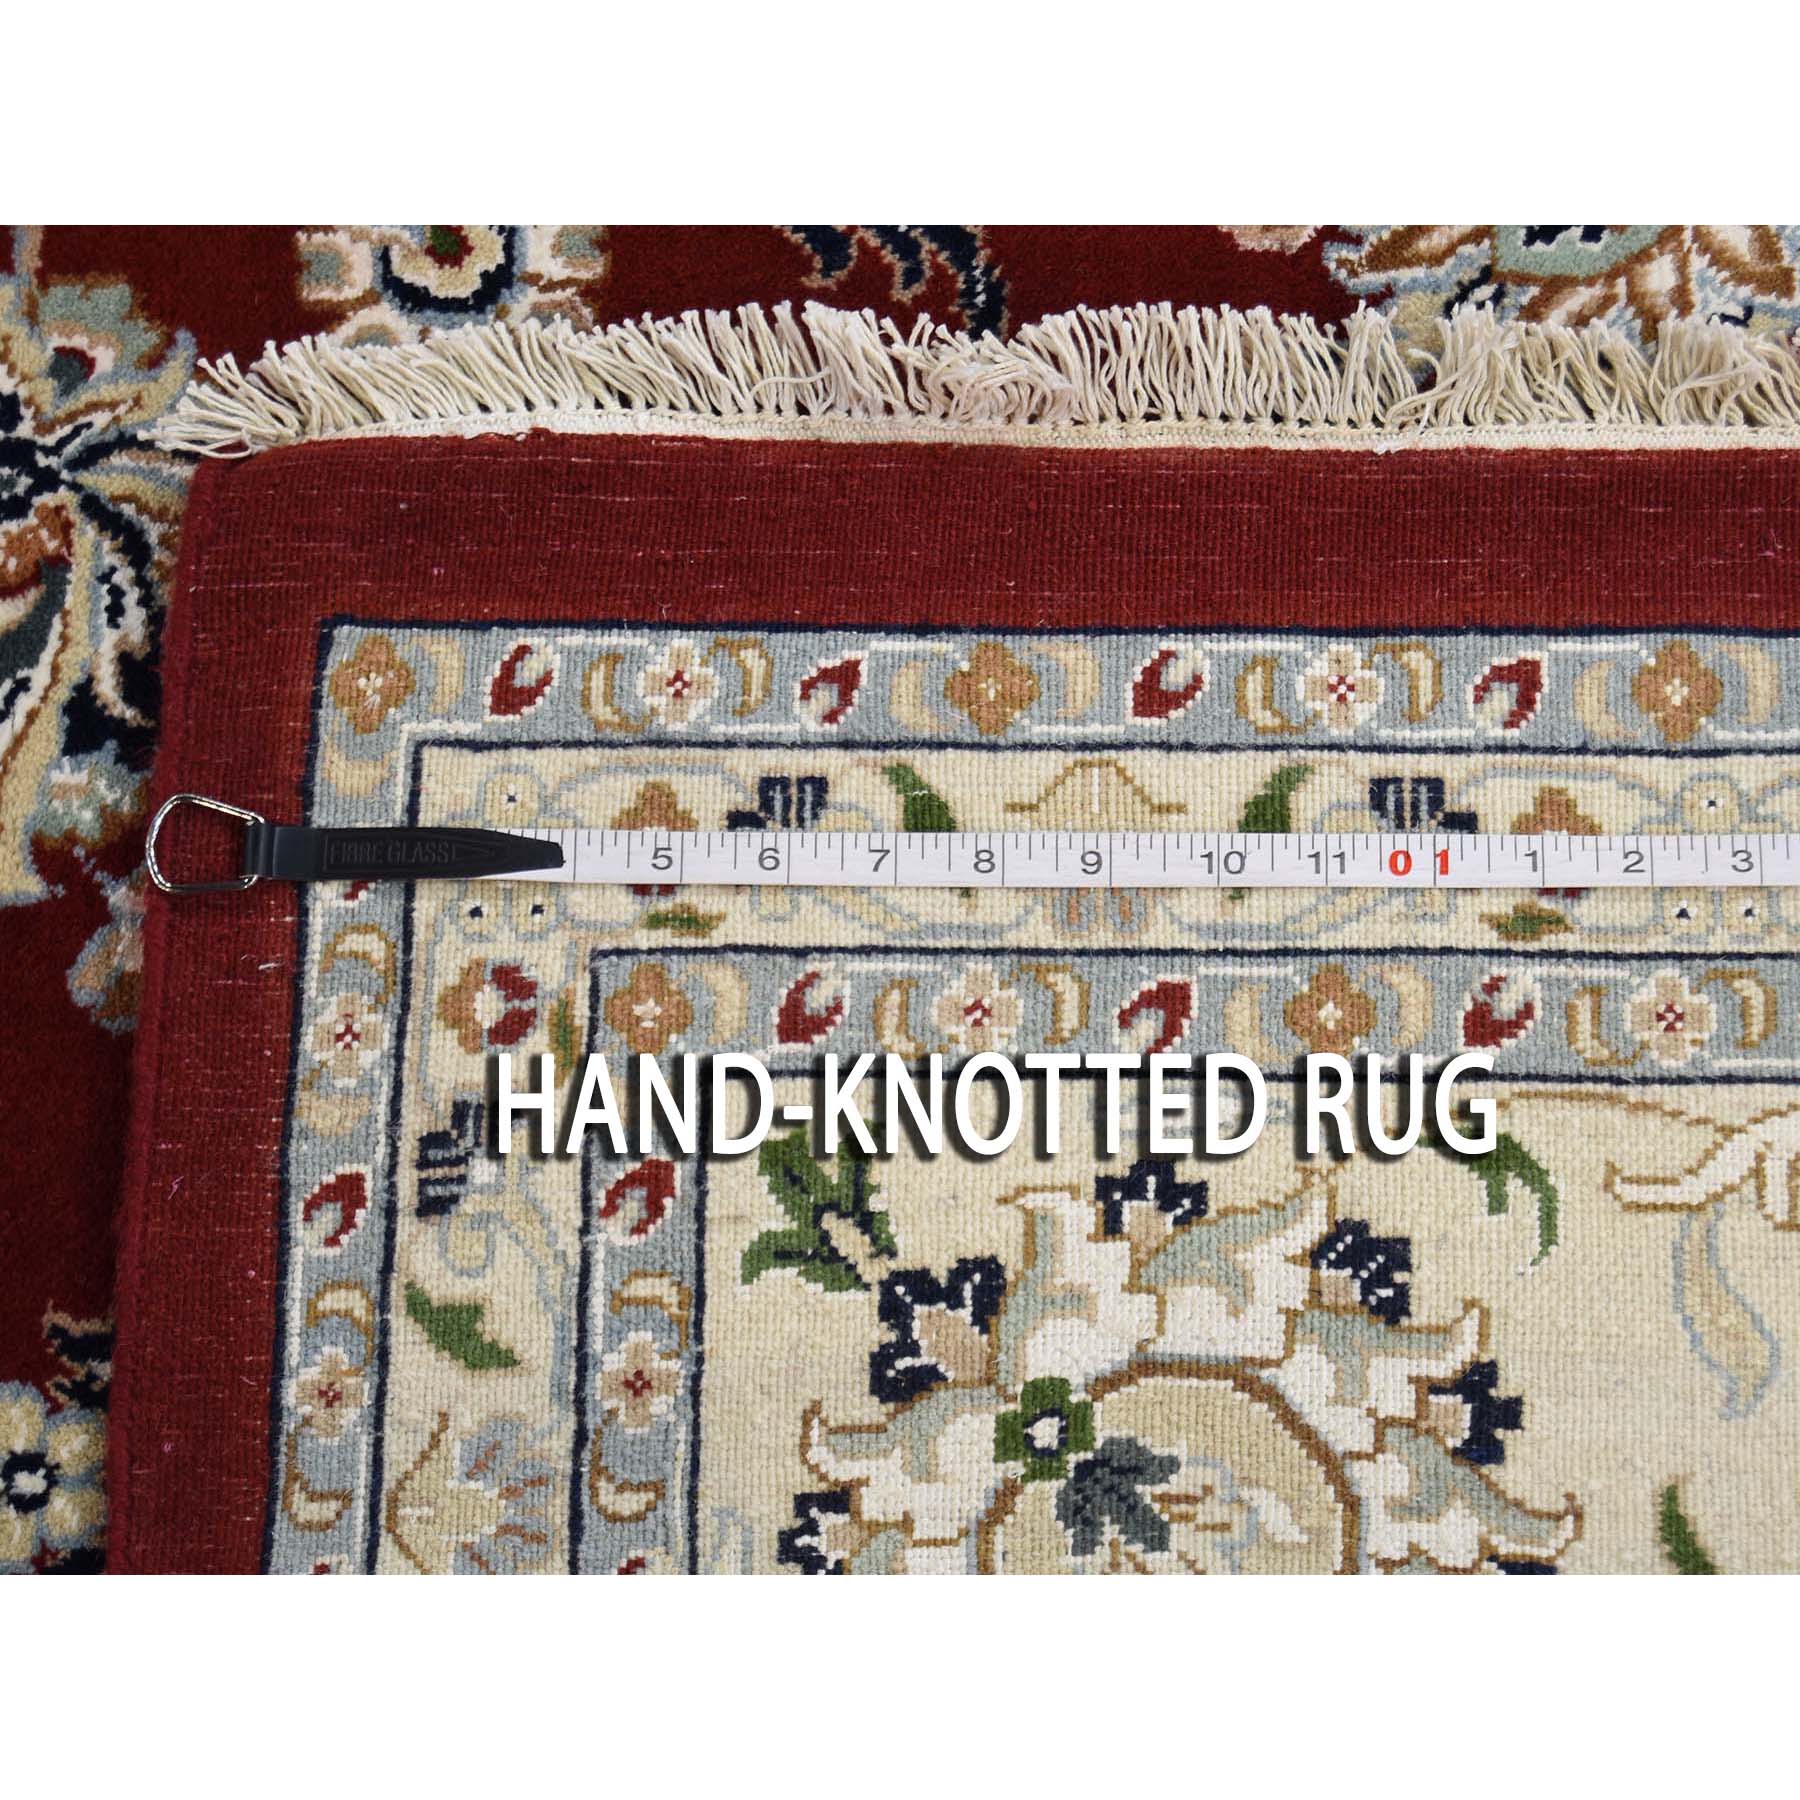 9-9 x14- 250 KPSI Red Wool and Silk Nain Hand Knotted Oriental Rug 